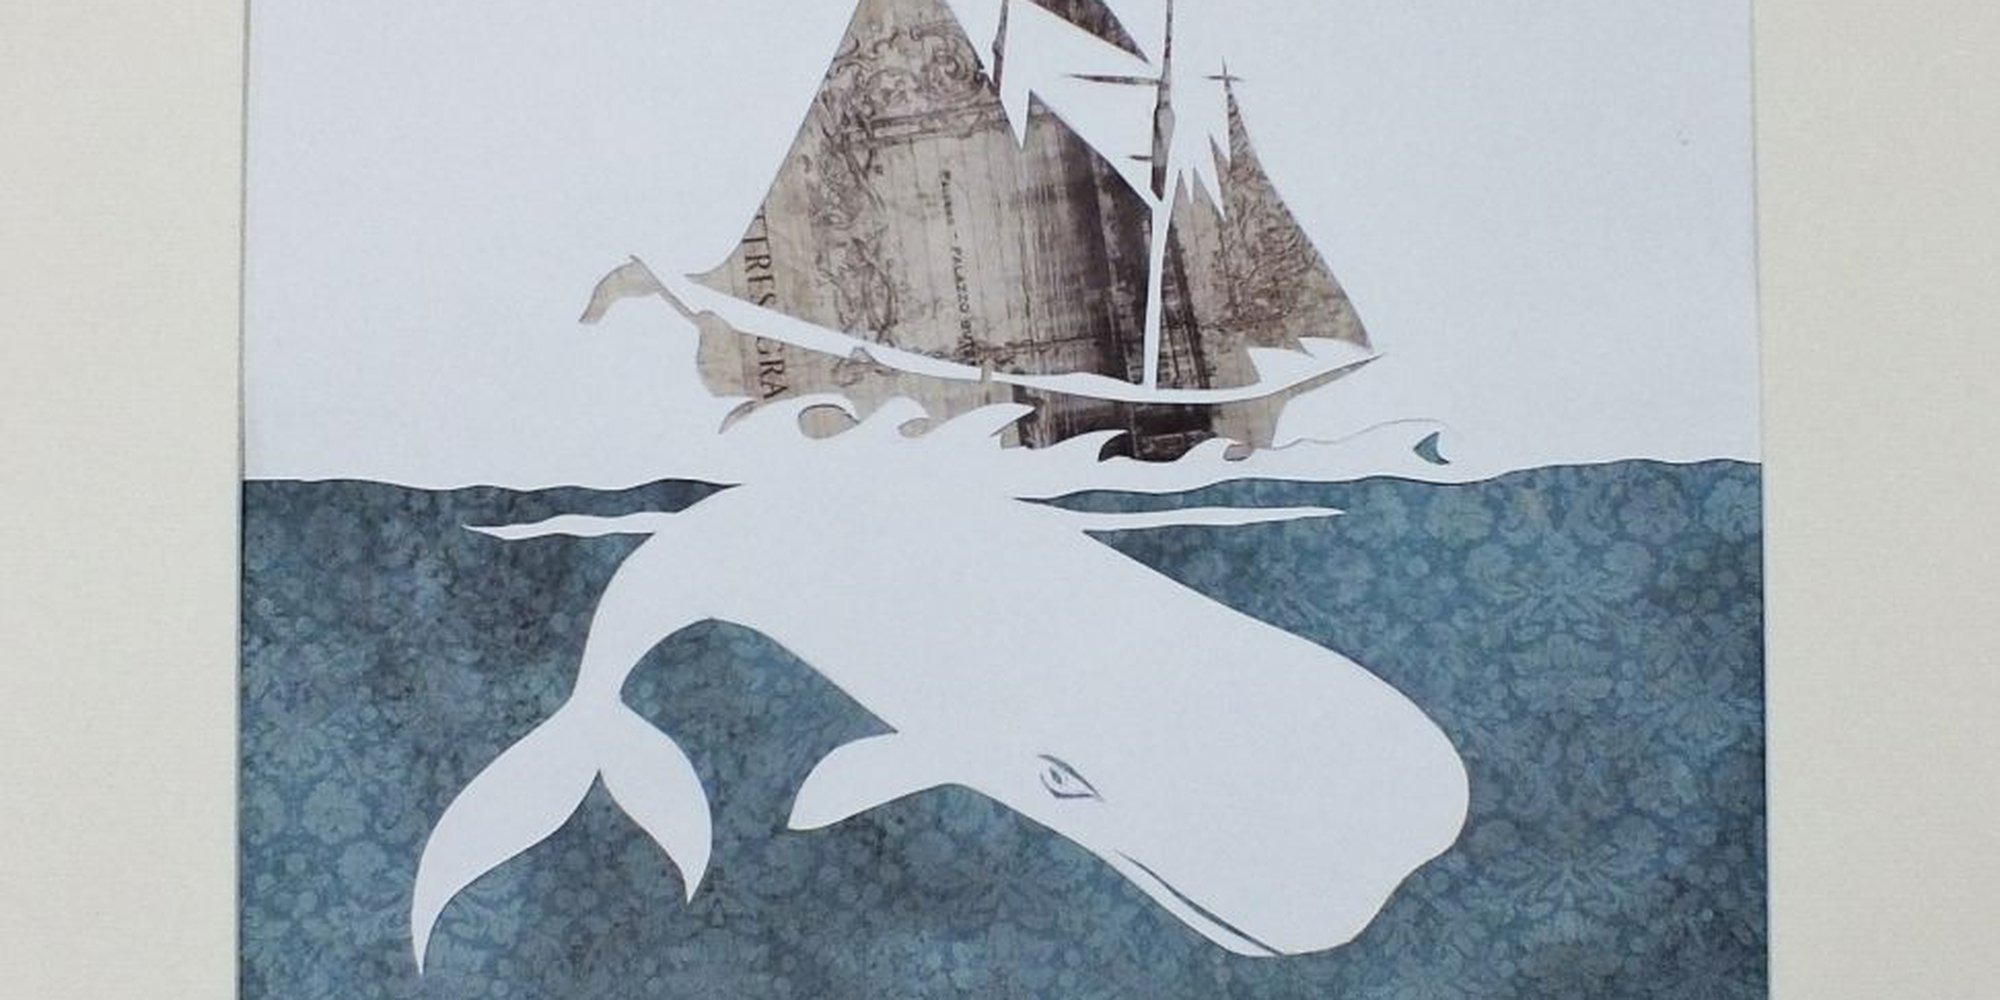 Art of the Day: "Moby Dick" by Flo